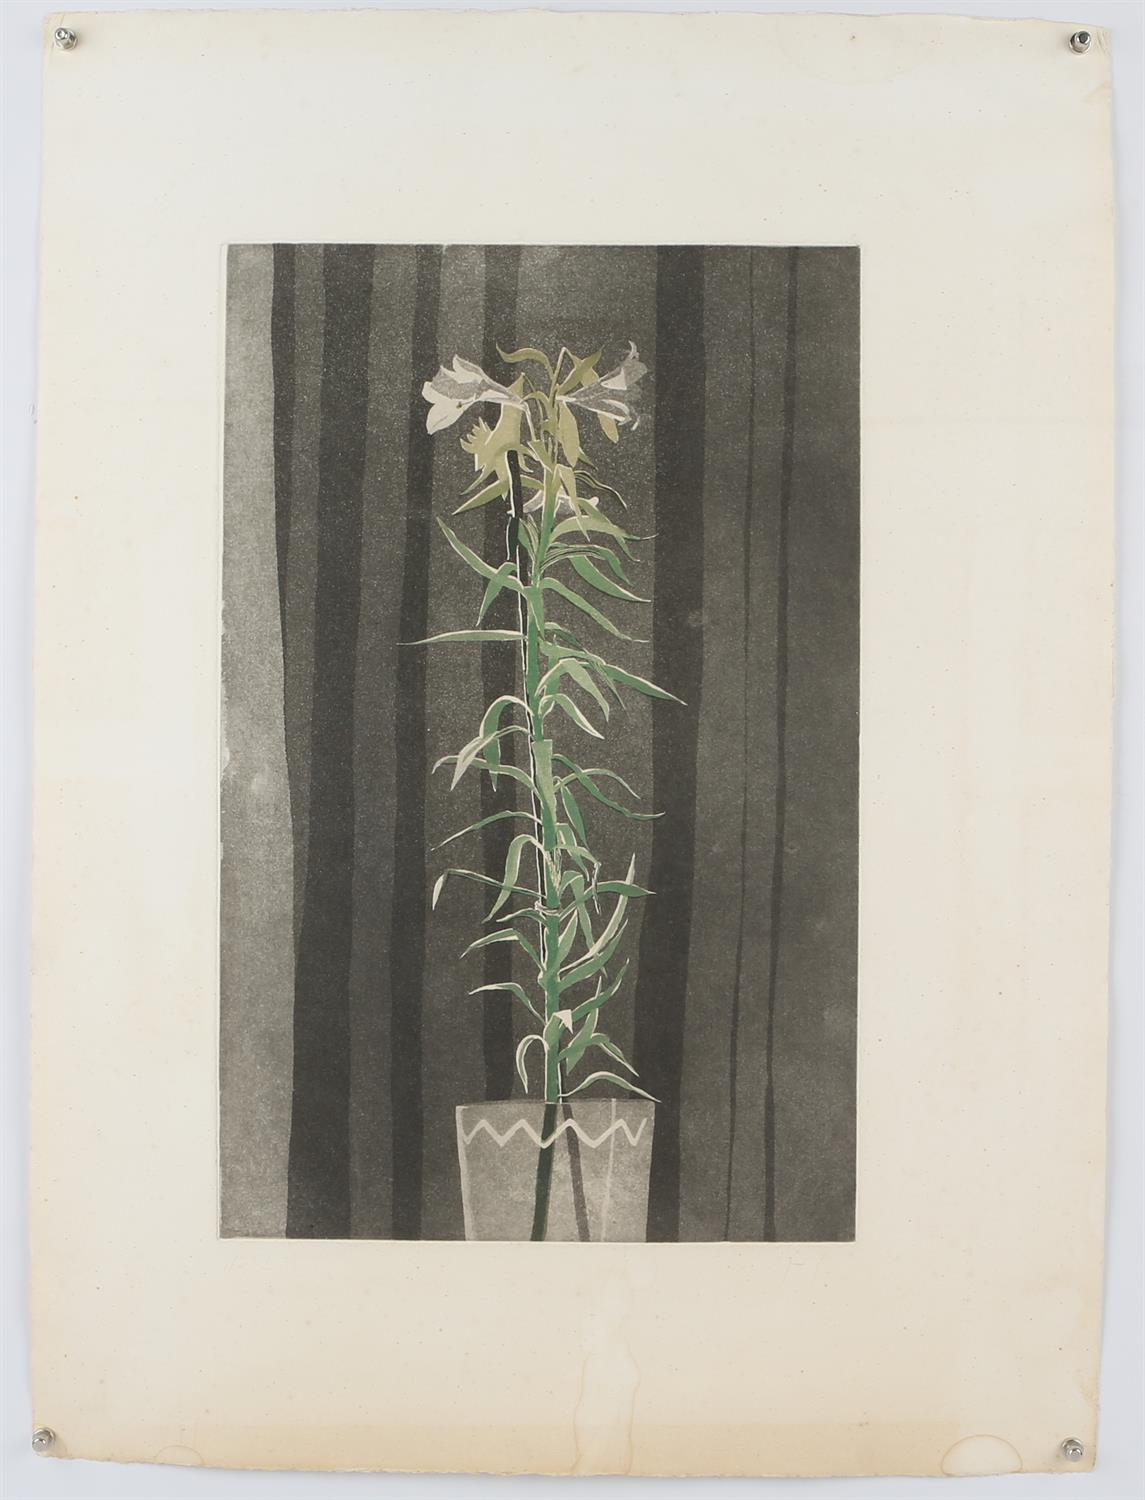 Patrick Procktor (British 1936-2003), Lilies, colour aquatint, initialled lower right, inscribed B.